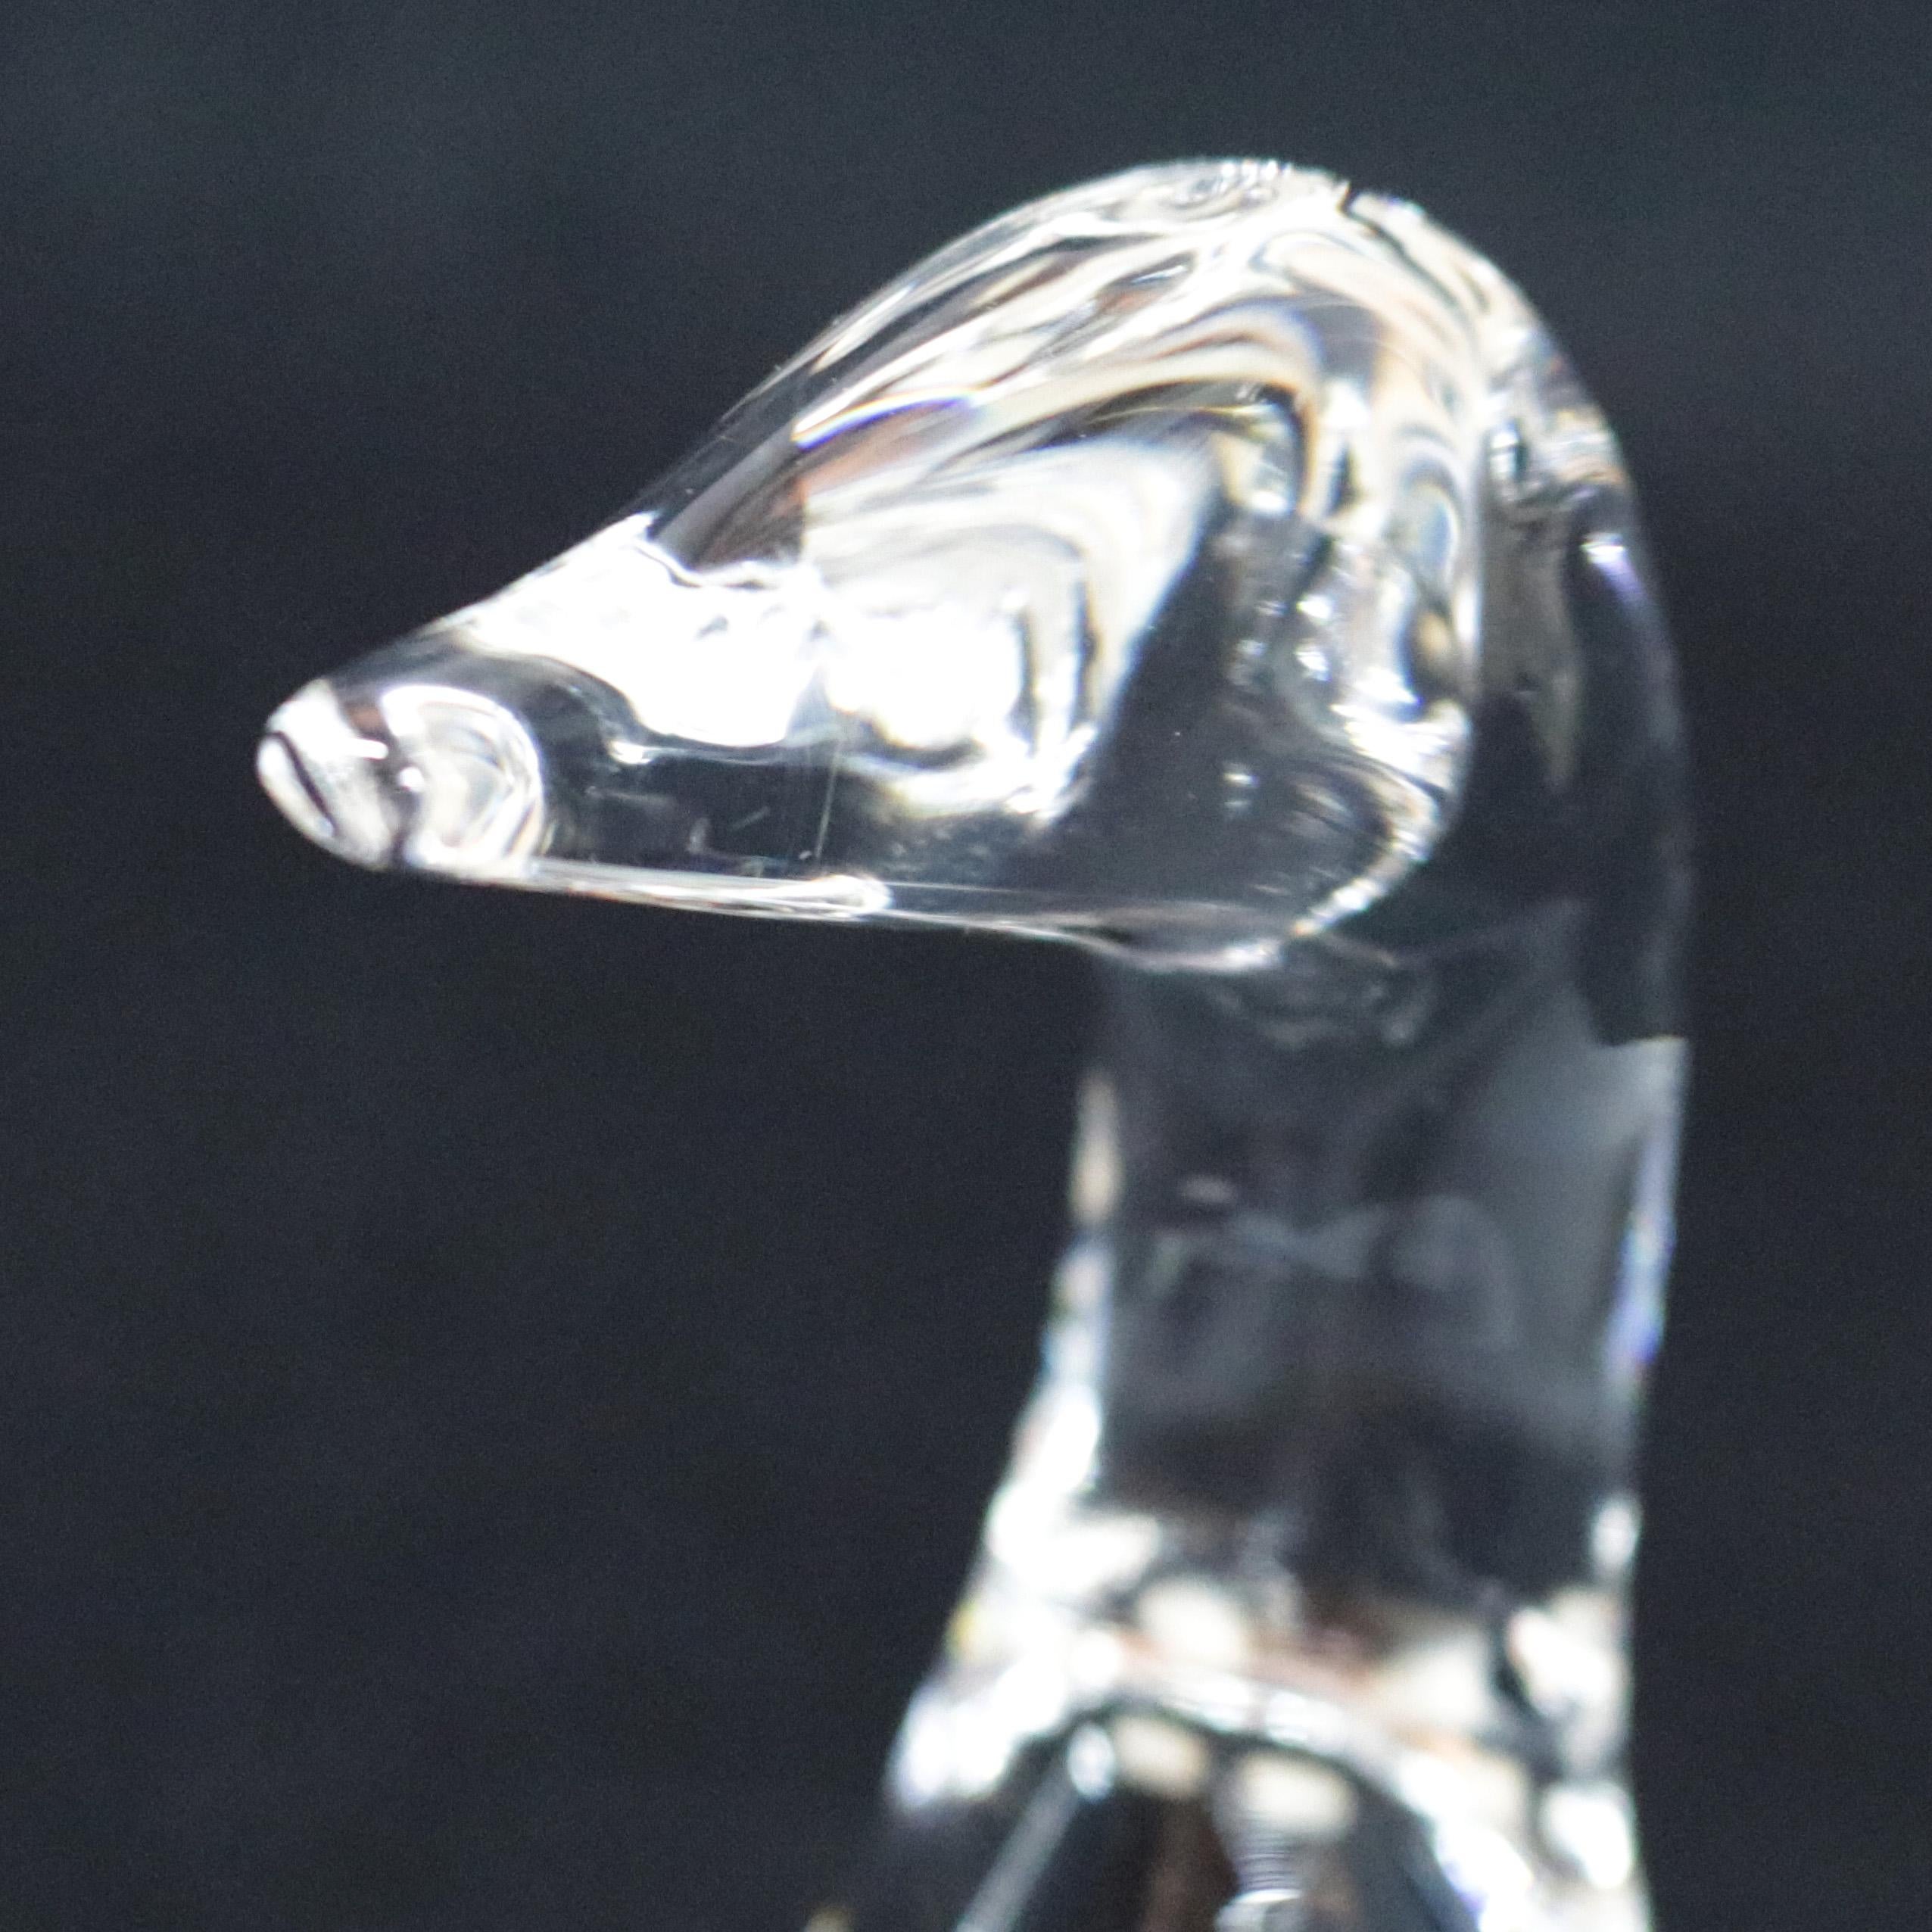 Mid-Century Modern Steuben Crystal Sculpture Paperweight of Gander by Lloyd Atkins, Signed